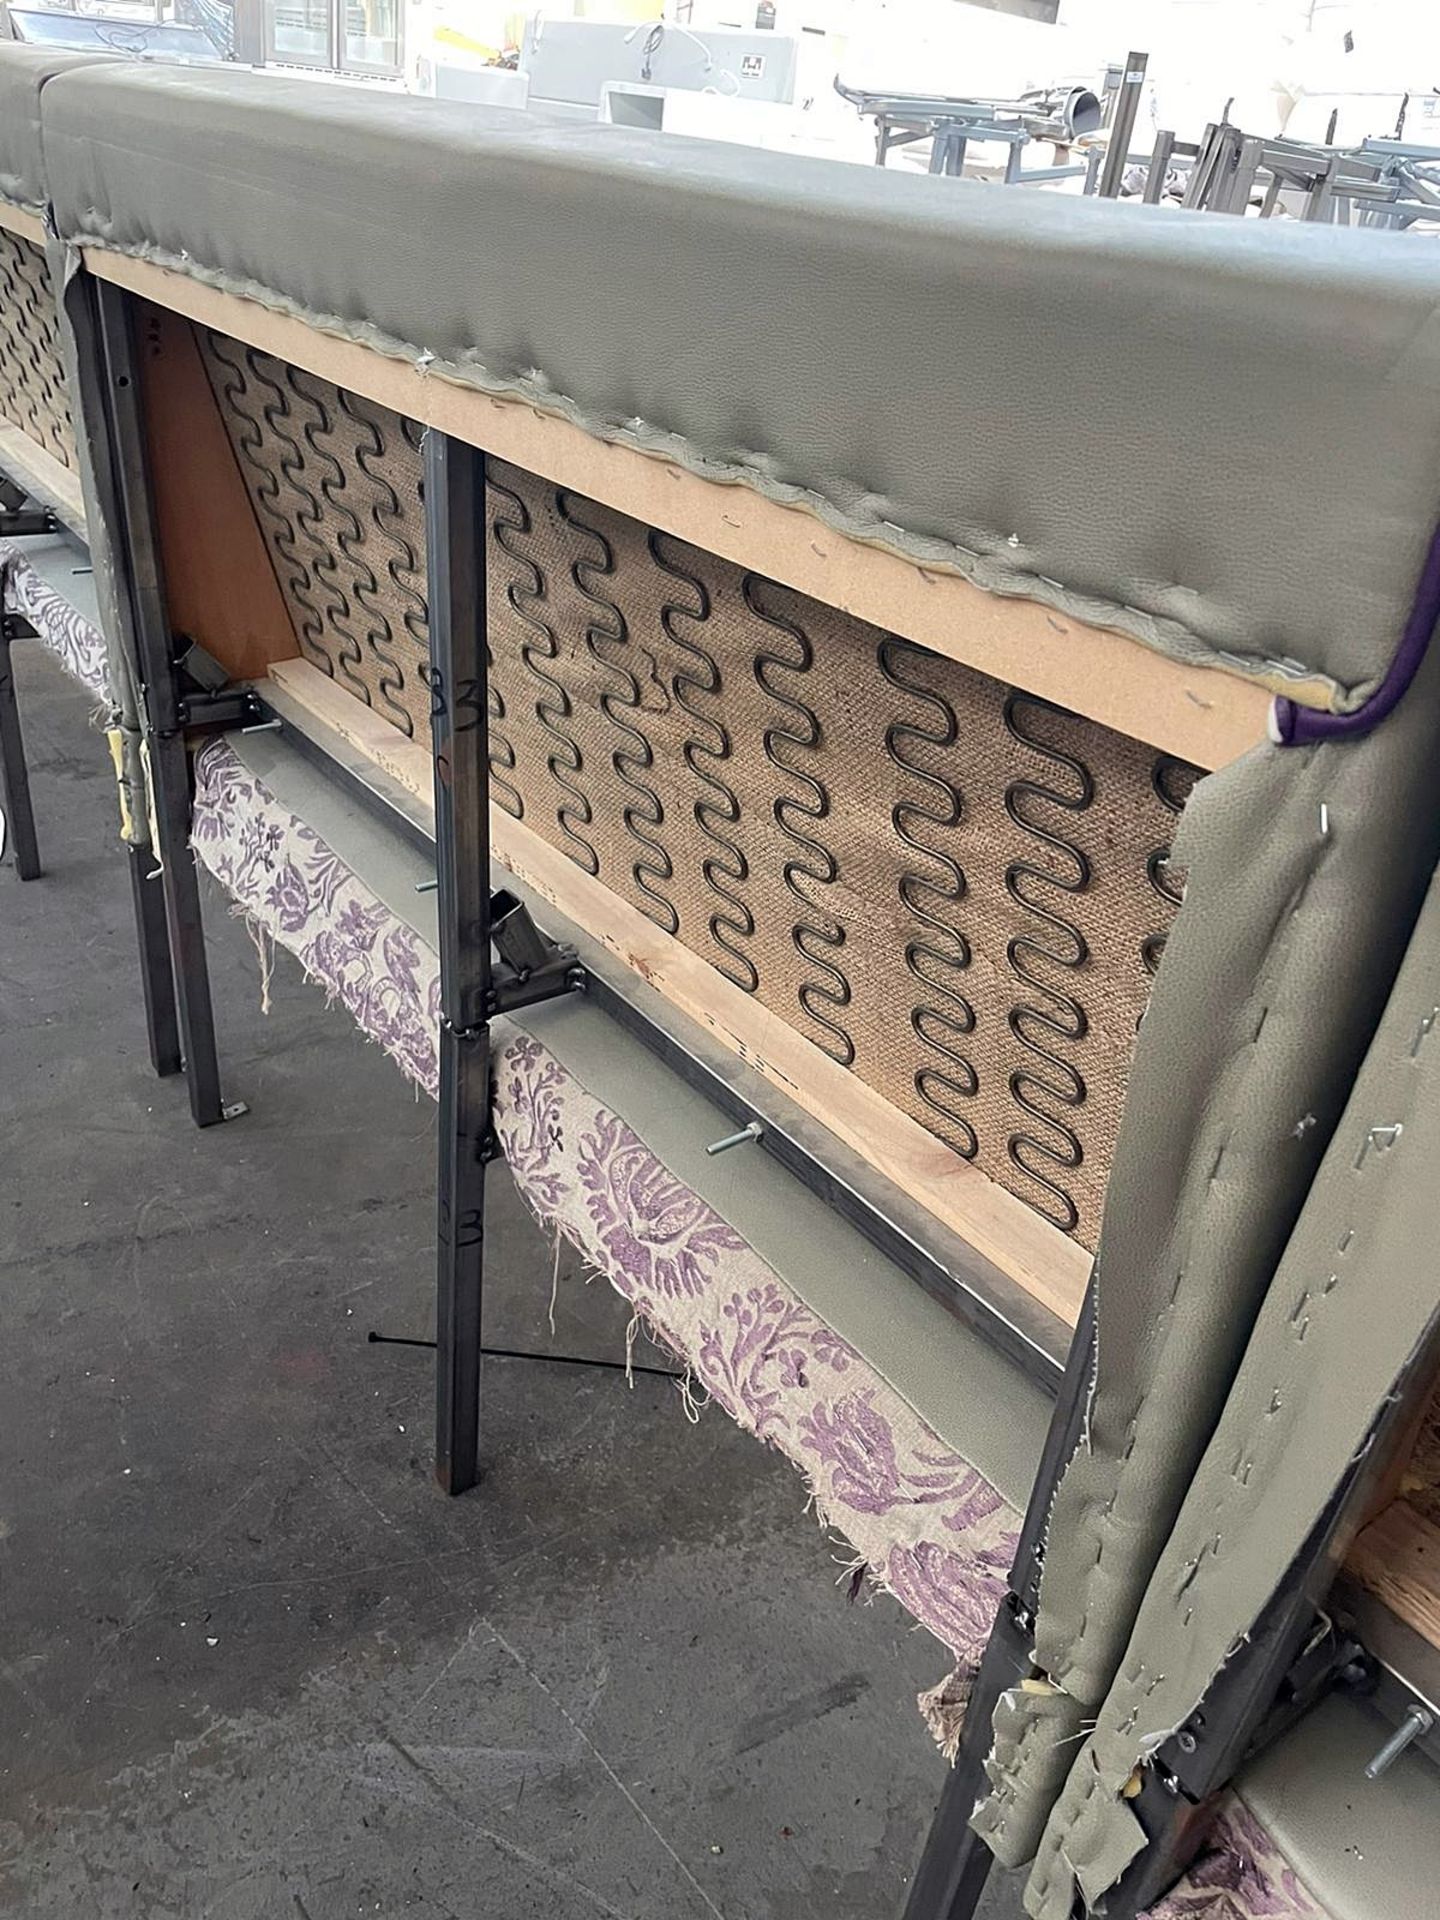 6 x Sections Of Upholstered Booth Seating In A Neutral Tone With Contrasting Purple Piping - Removed - Image 3 of 5